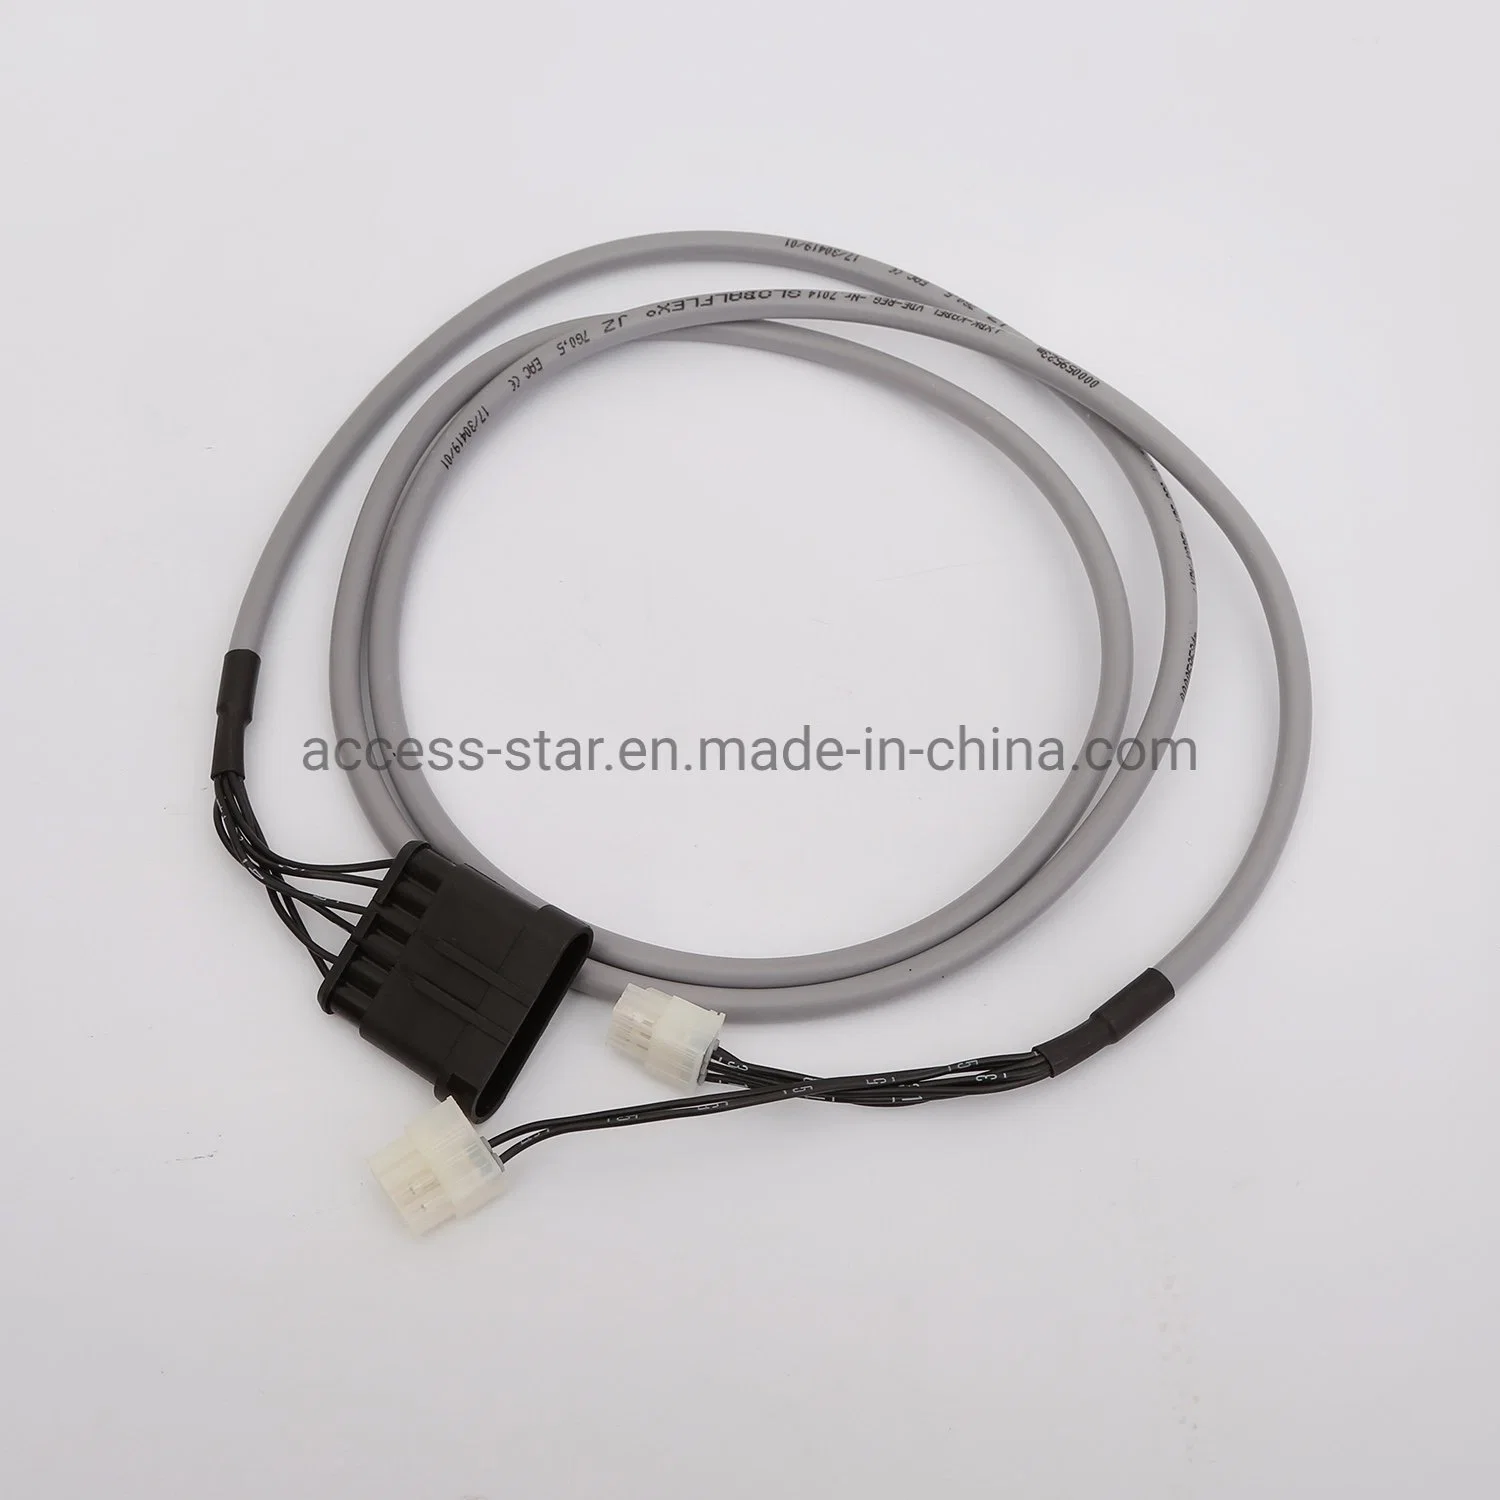 Multi Core Copper Electric Wires Cables Electrical Cable with U Shaped Copper Tube Terminals Wire Assembly